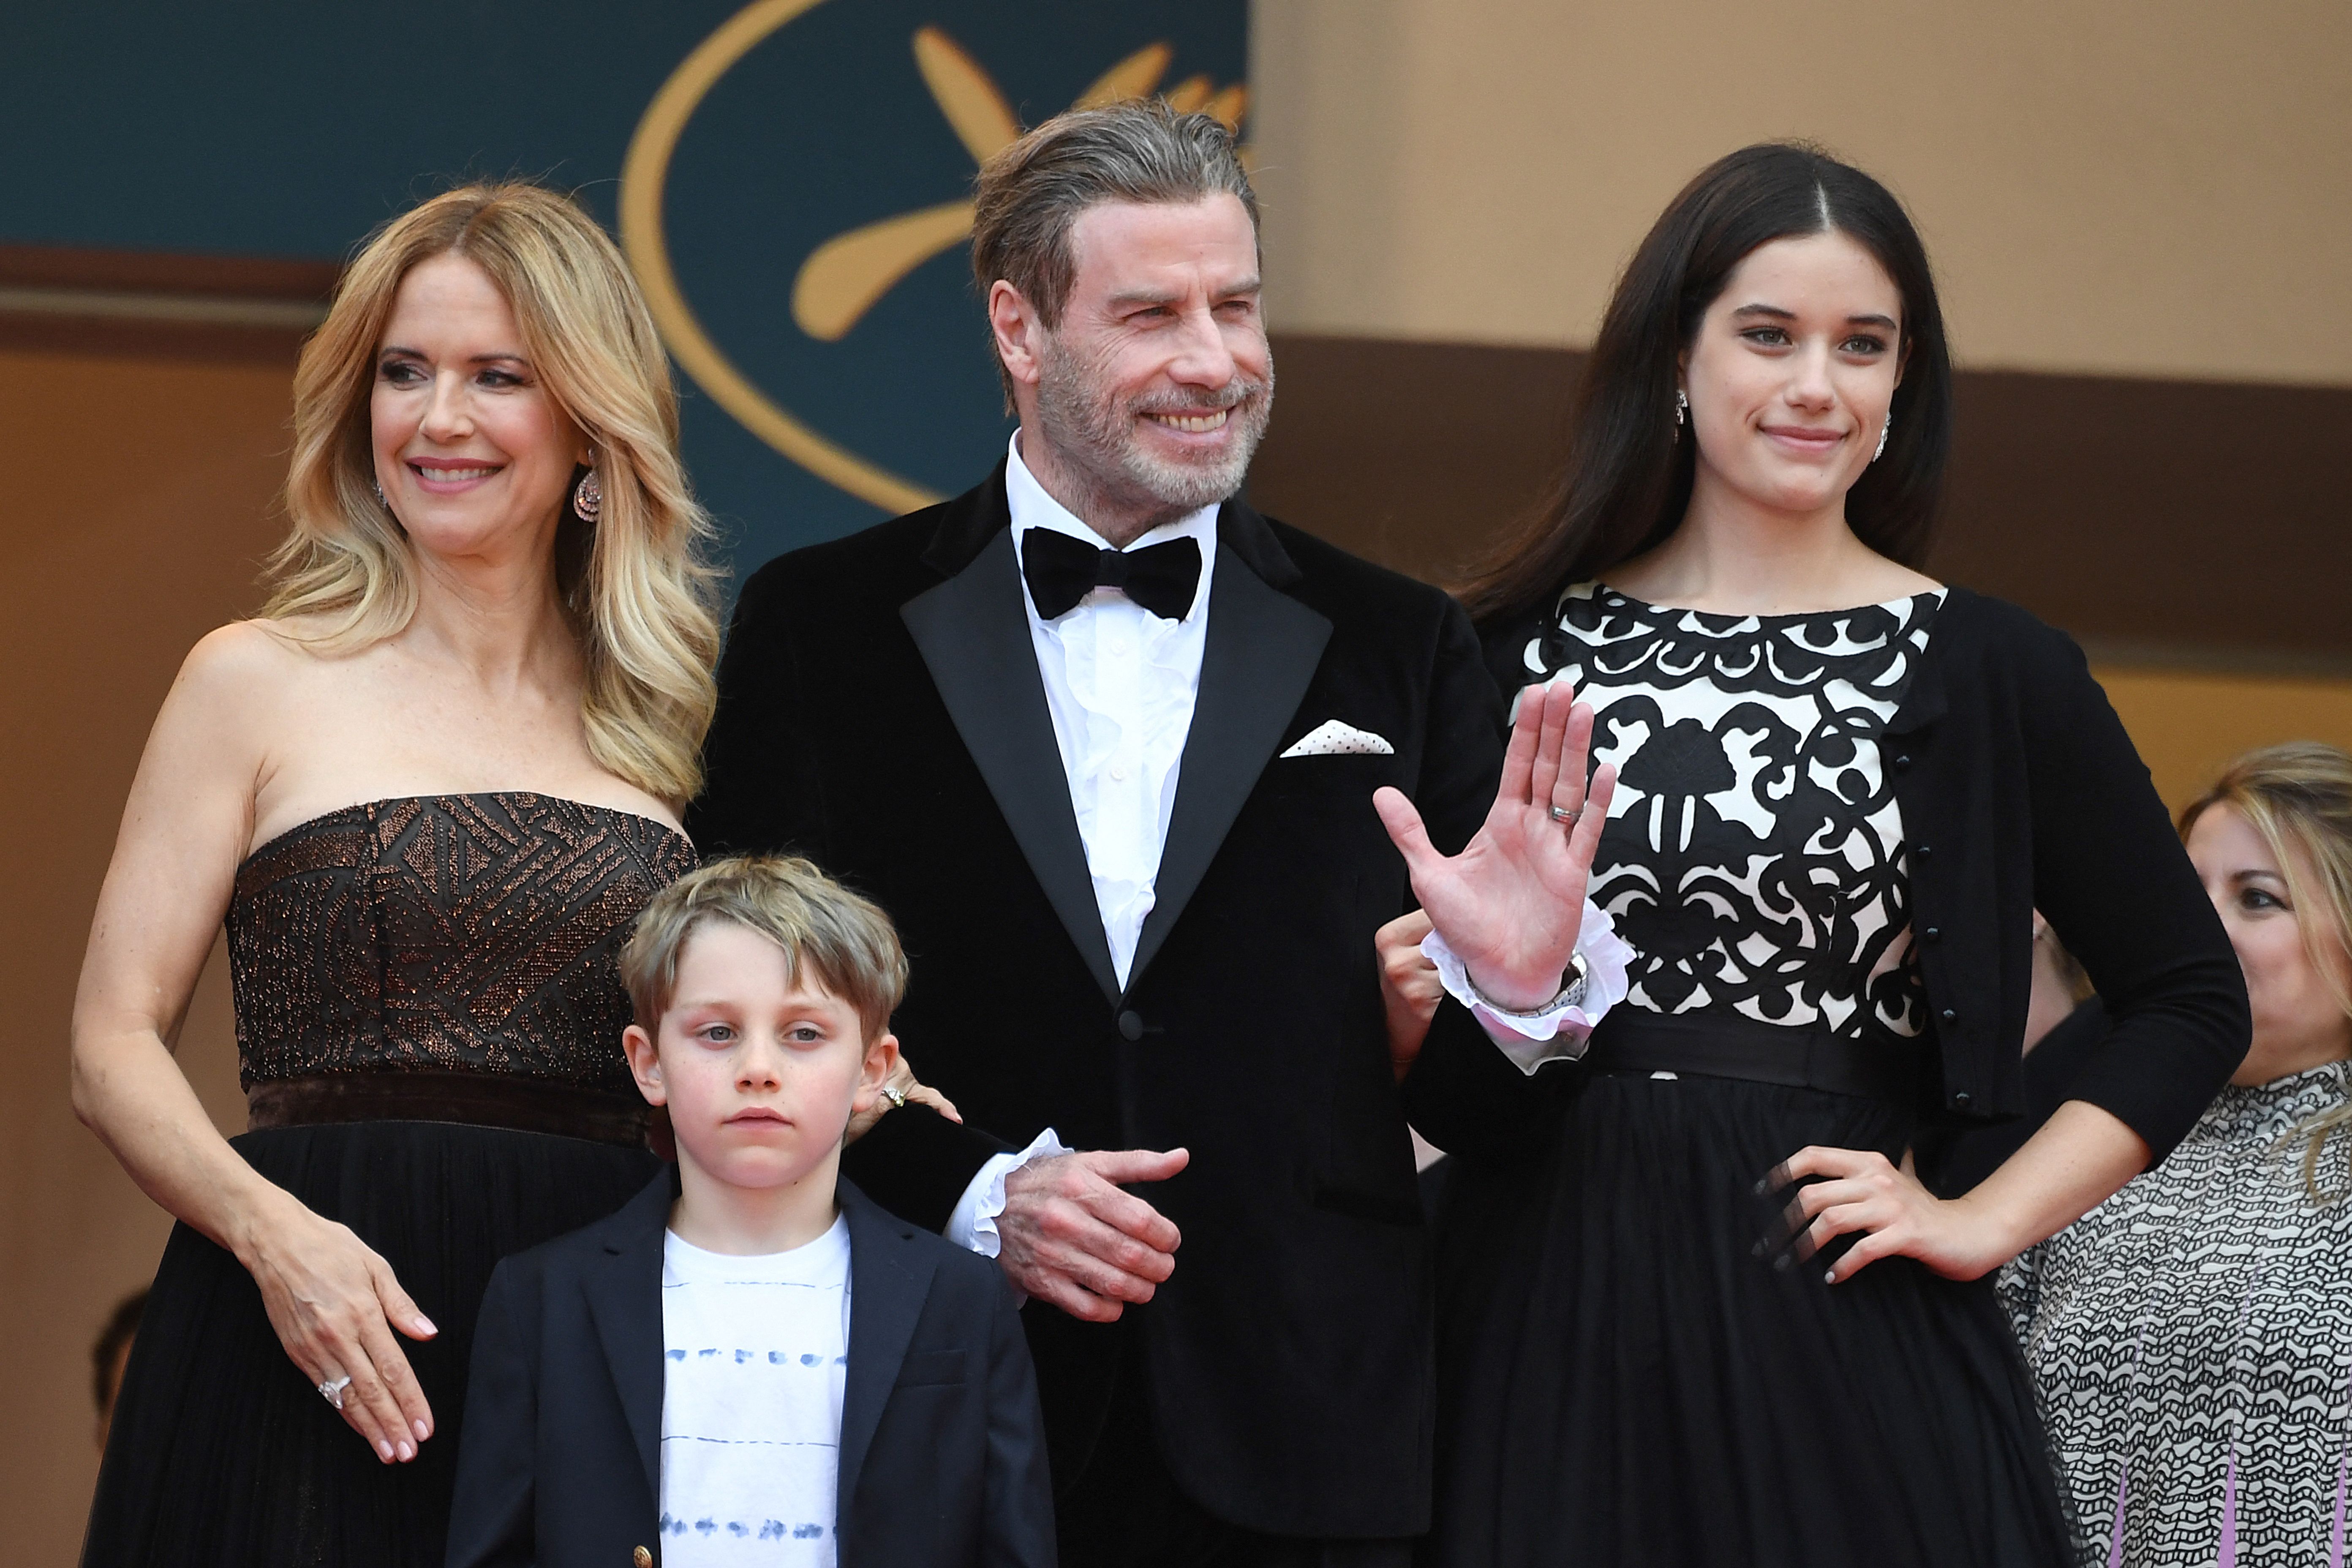 Kelly Preston, John Travolta, Ella Bleu Travolta, and Benjamin Travolta pose as they arrive for the screening of the film "Solo: A Star Wars Story" in Cannes, southern France on May 15, 2018. | Source: Getty Images